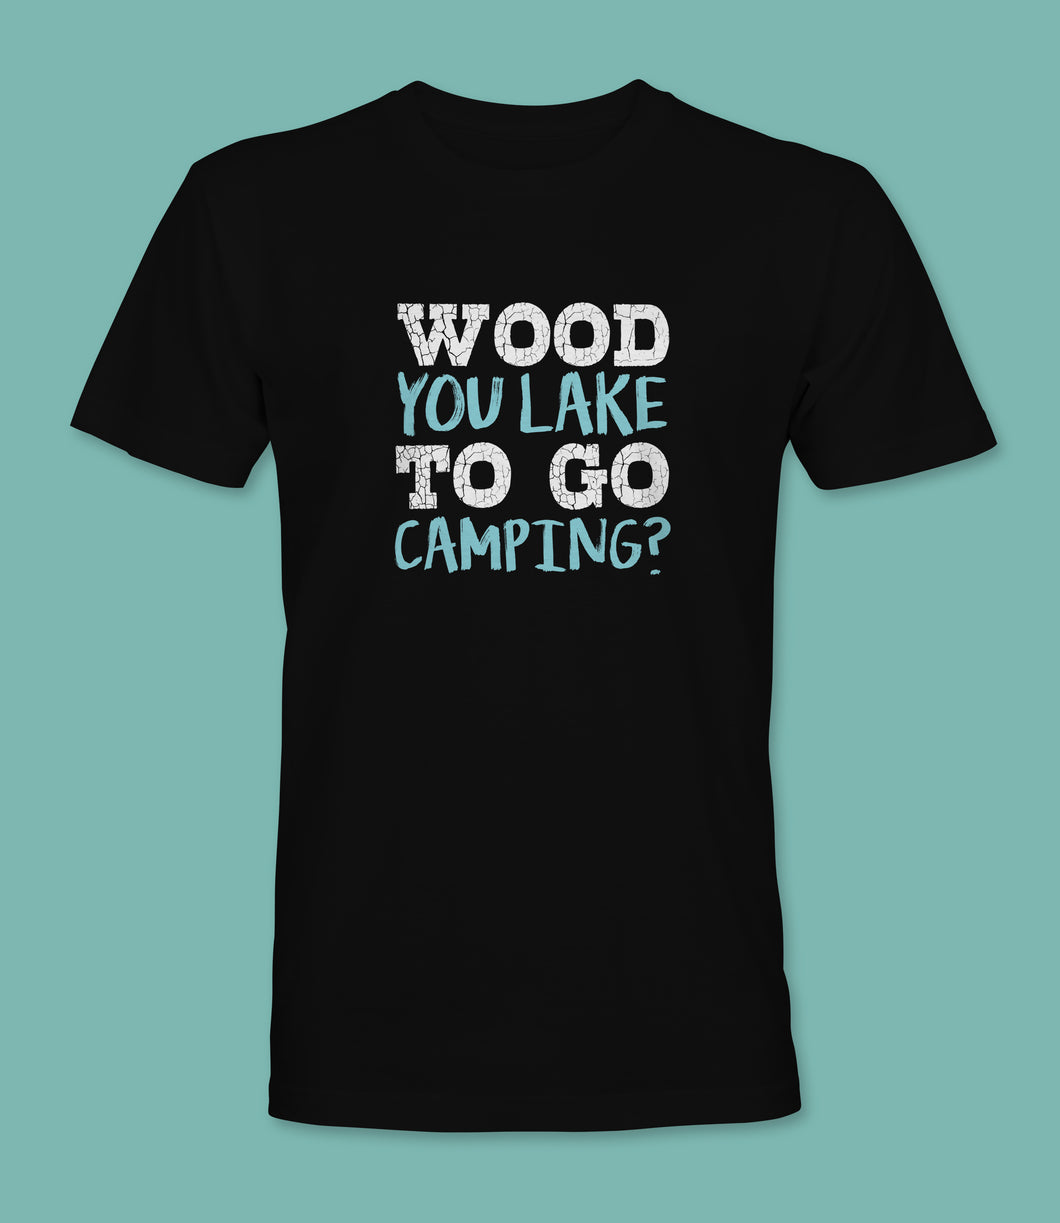 WOOD You LAKE To Go Camping?